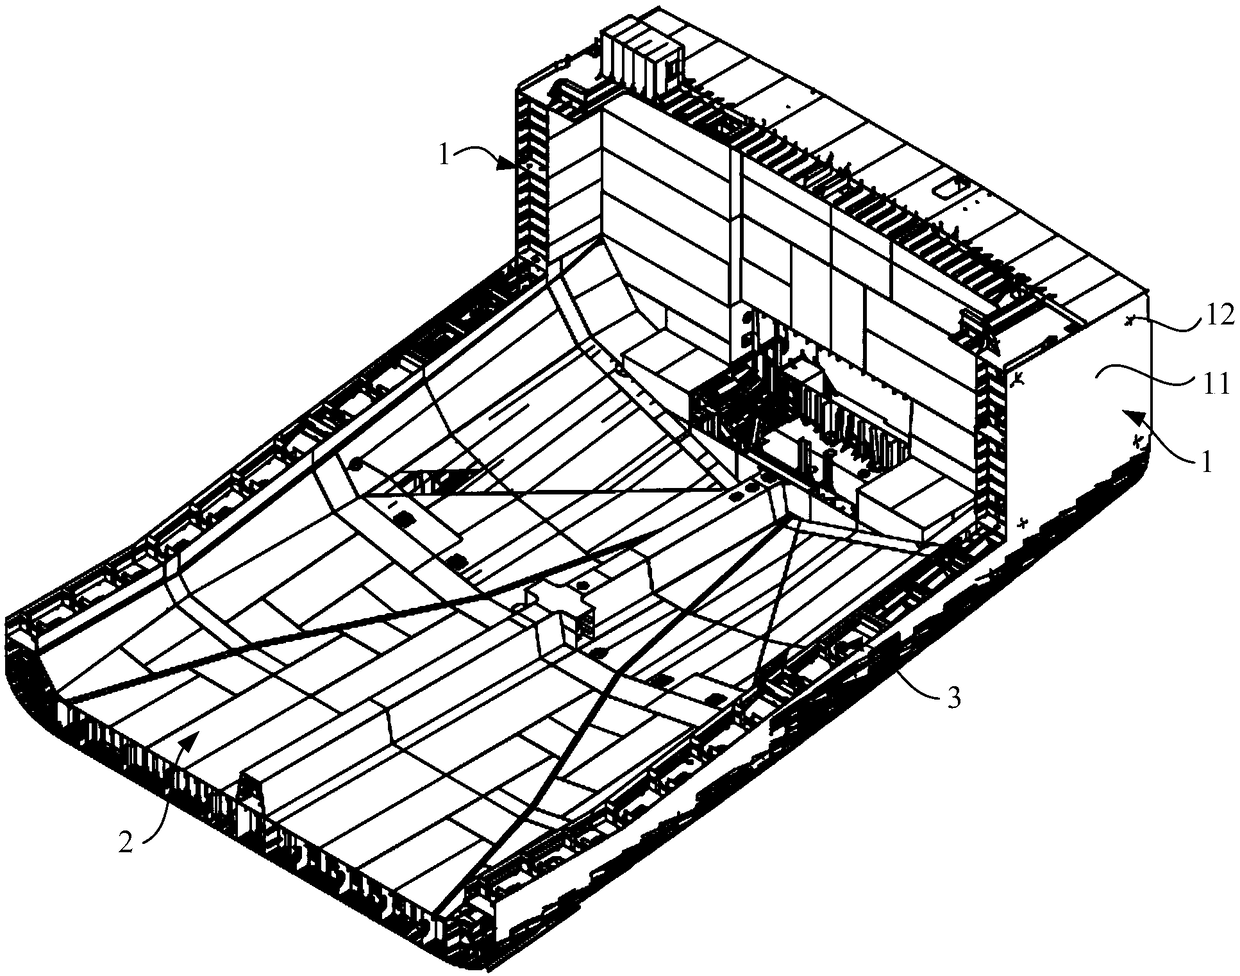 A measurement method for simulated loading of a ship in the large closing stage